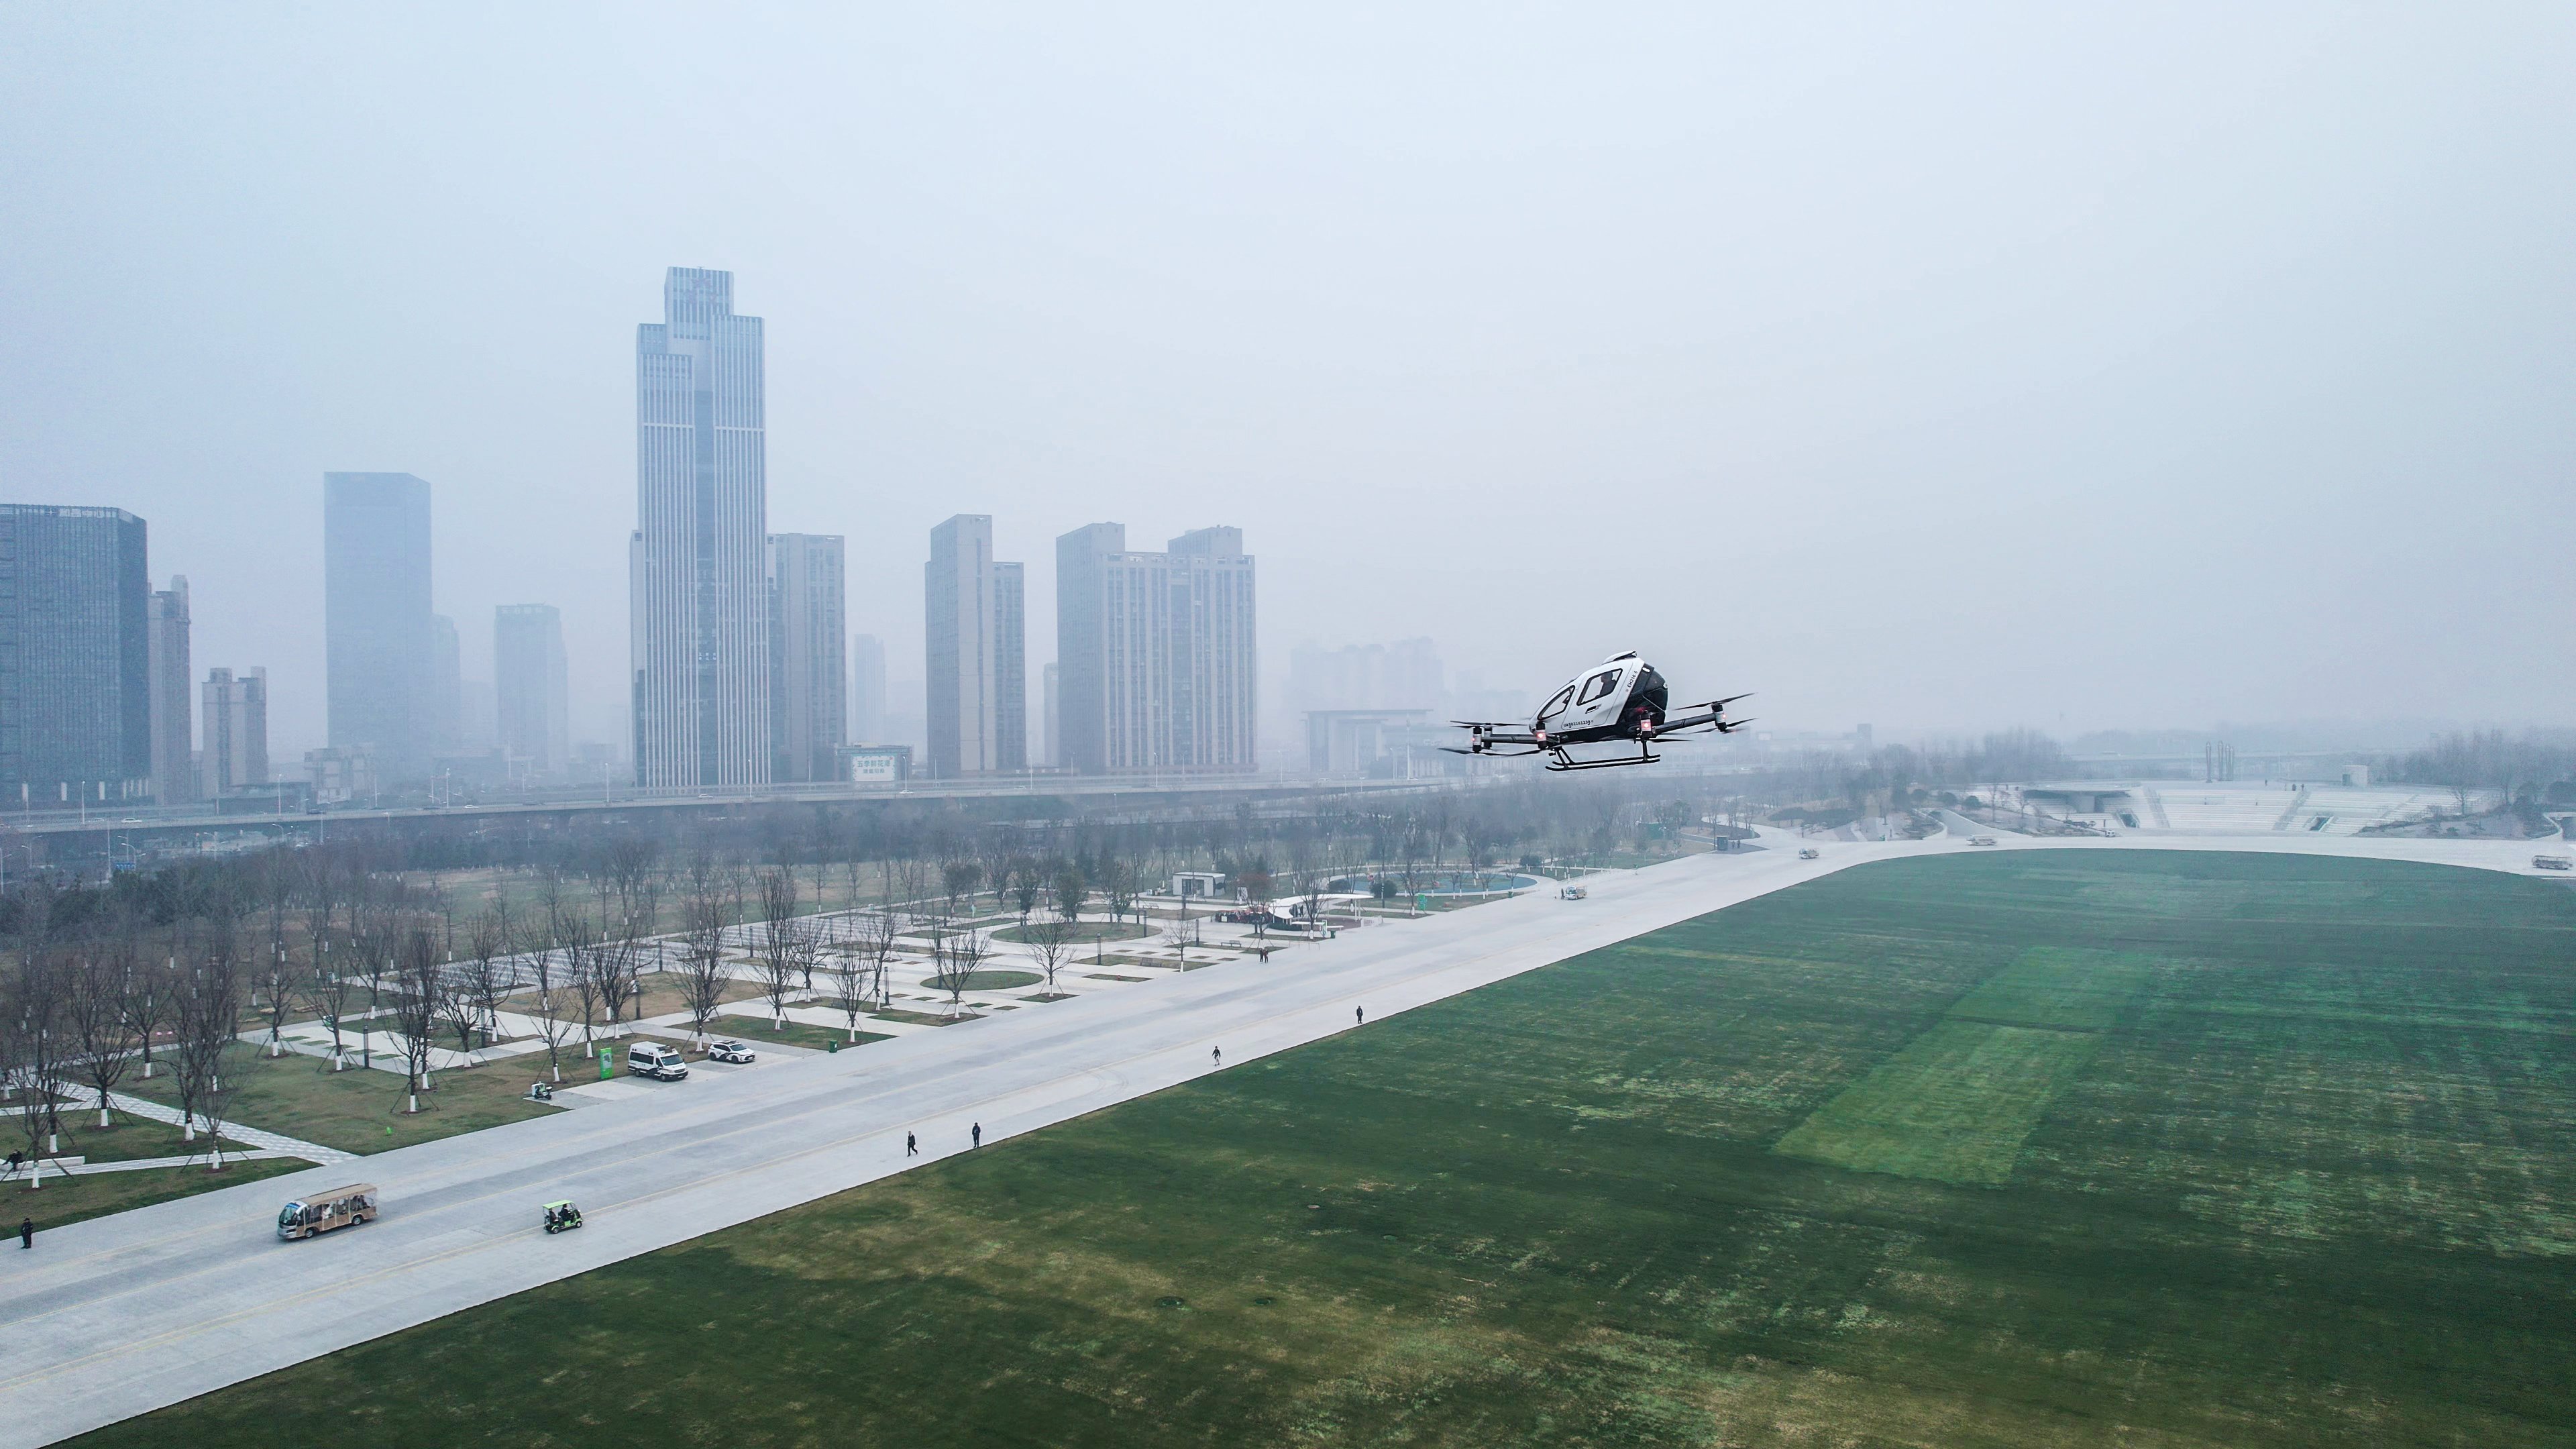 Photos and videos: Flying taxi successfully makes its first commercial flights in China